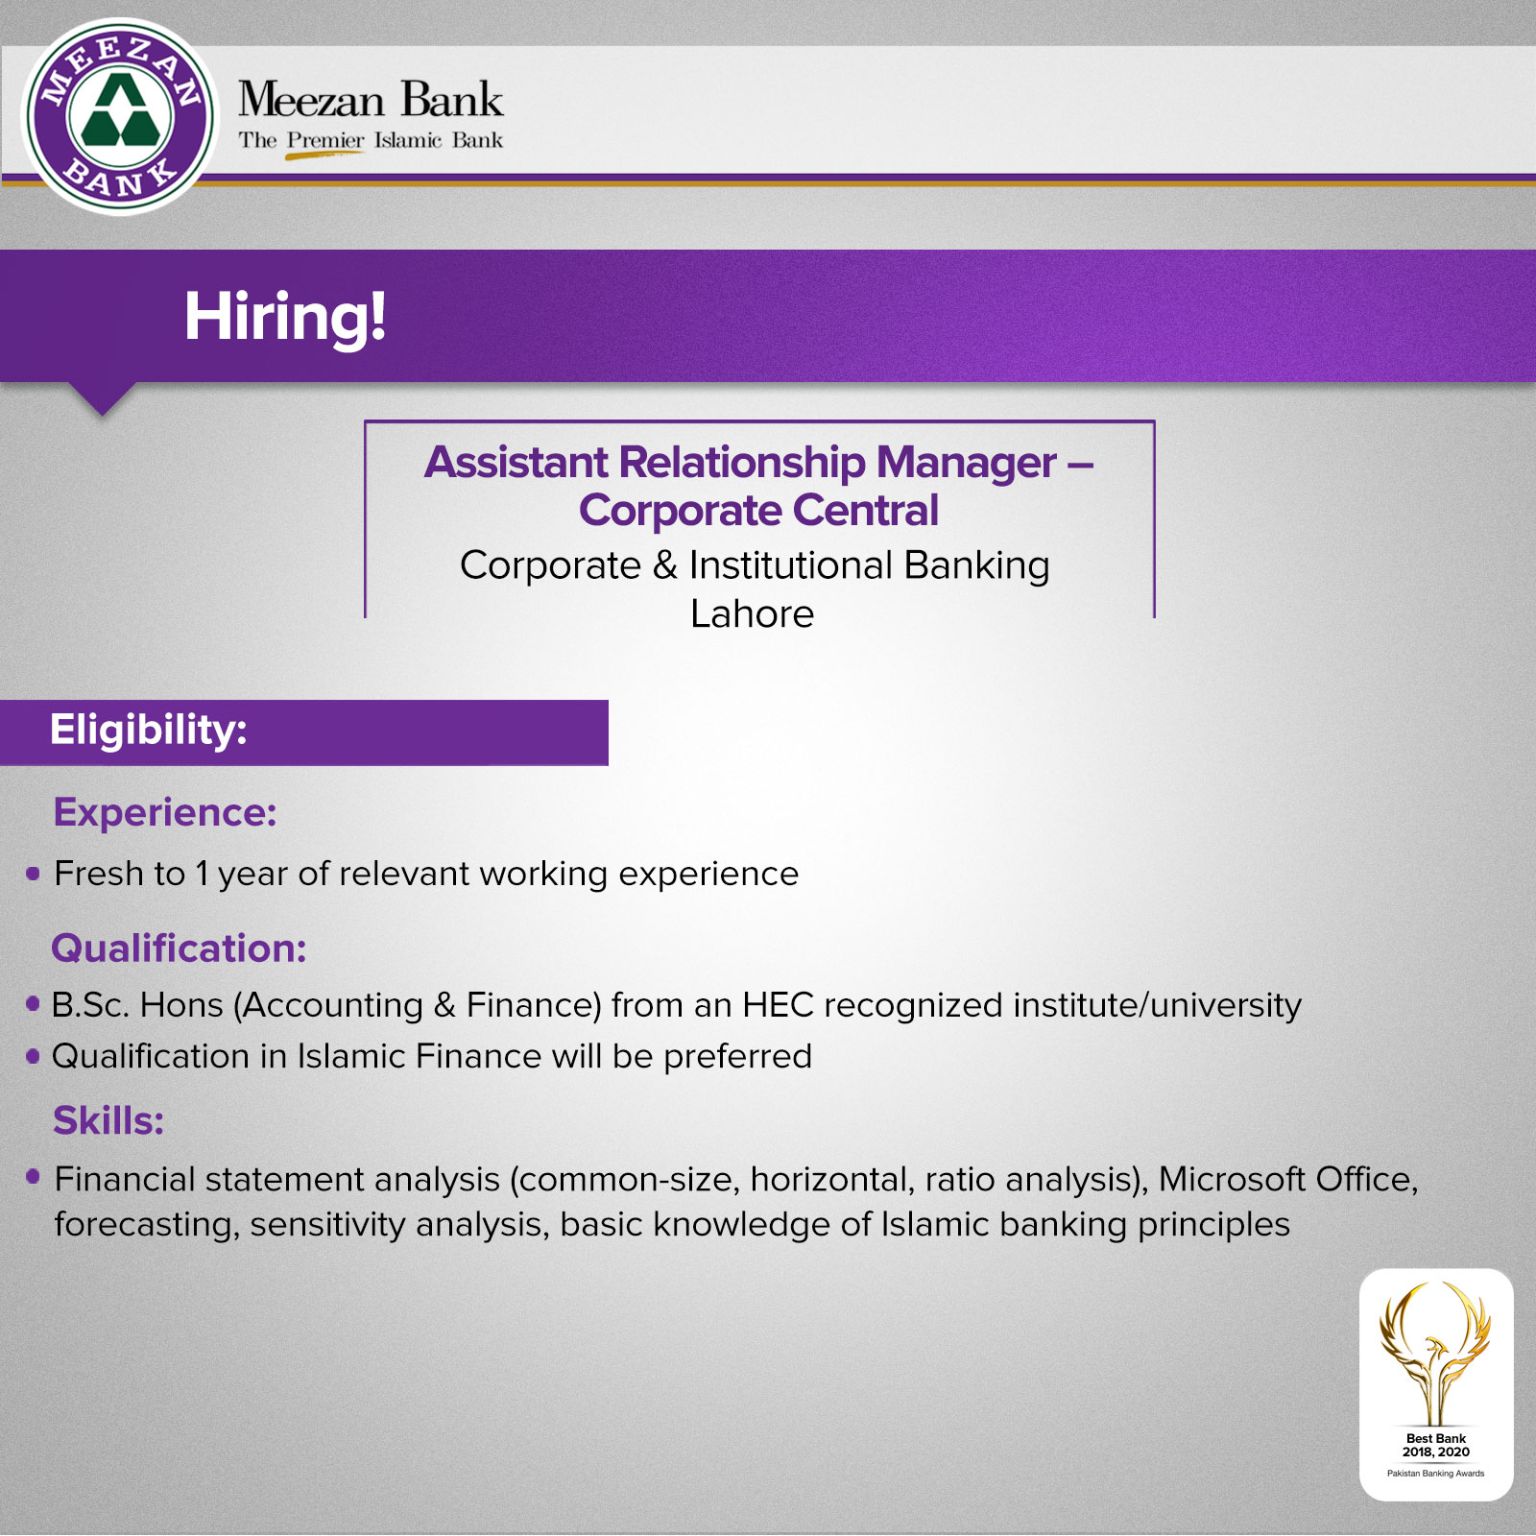 Meezan Bank is looking to hire Assistant Manager - Corporate Central